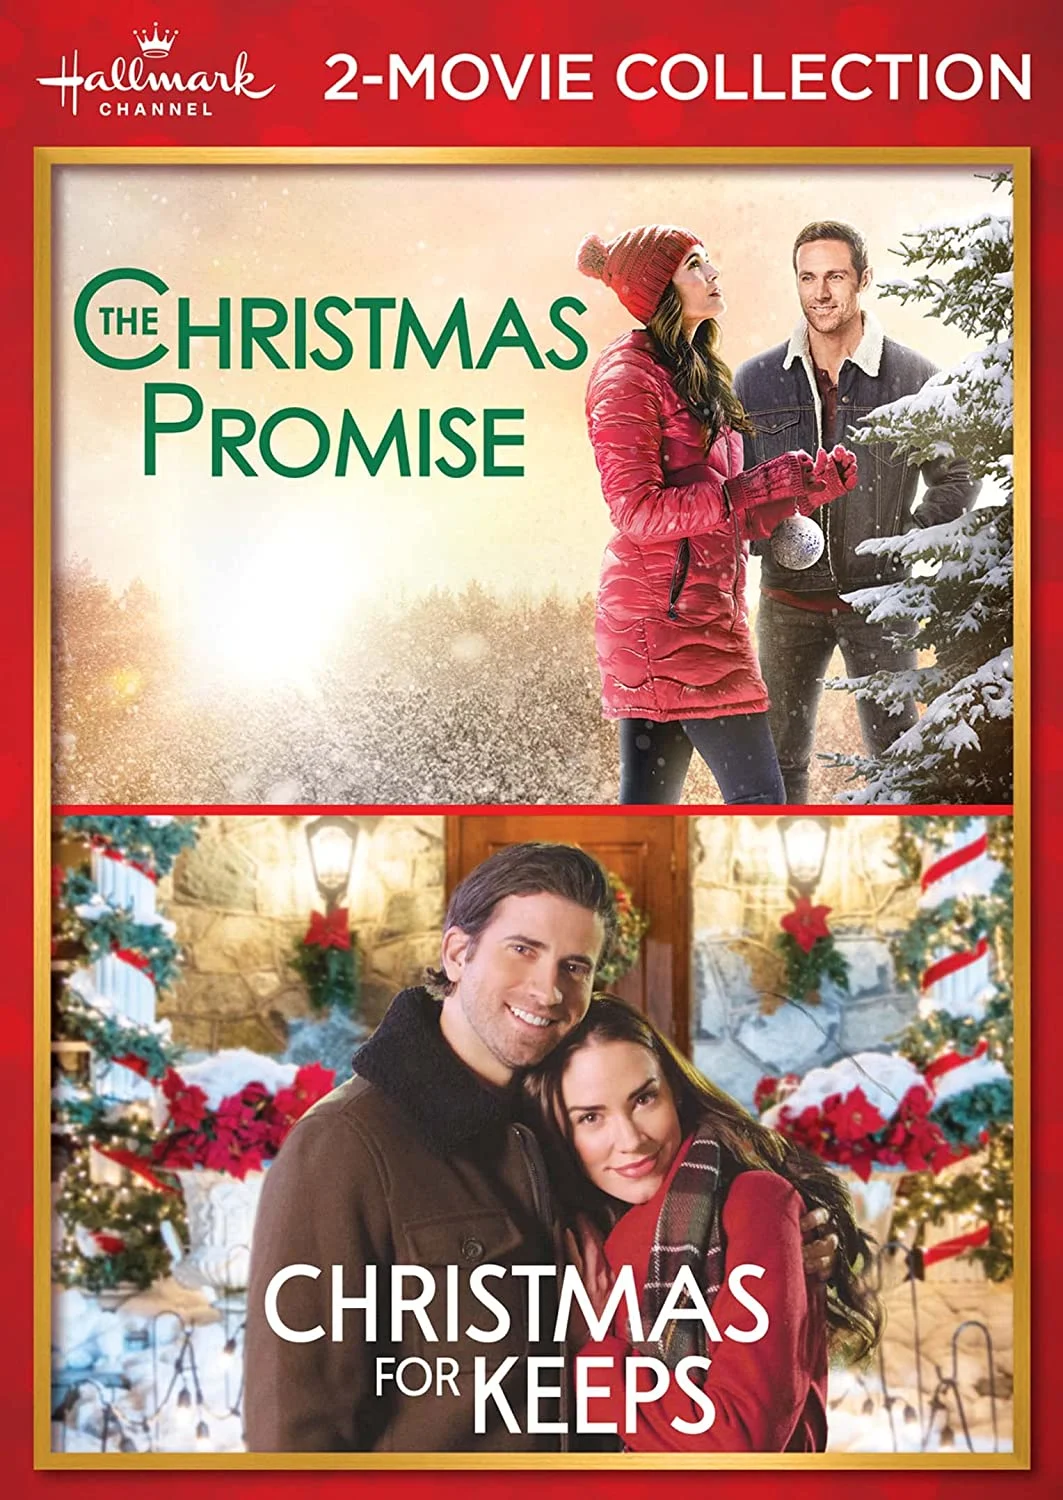 Hallmark 2-Movie Collection: The Christmas Promise & Christmas for Keeps (DVD) on MovieShack